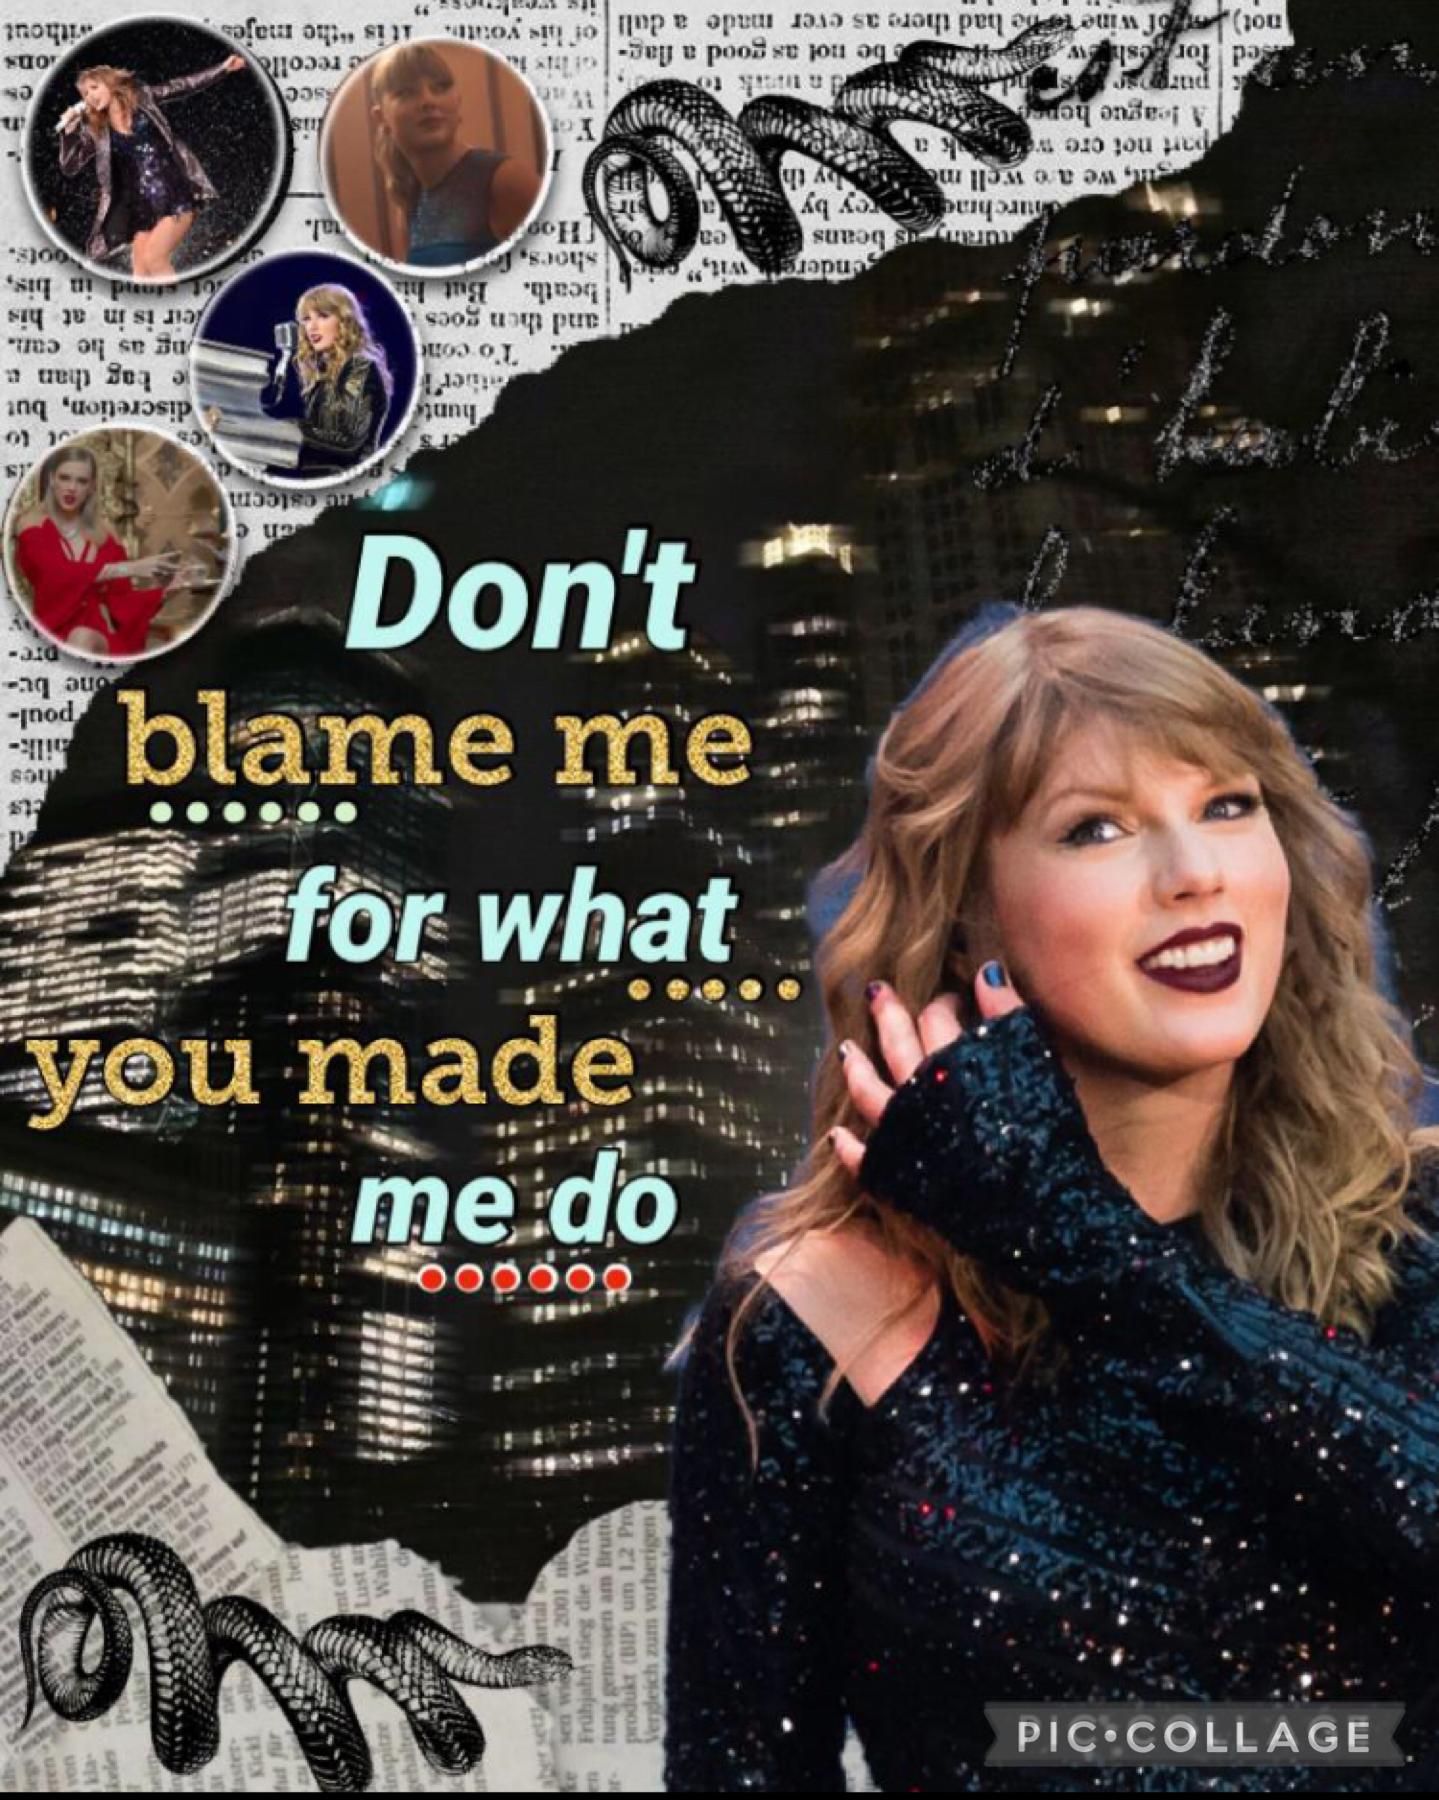 7.4.24 Reputation Taylor Swift  aesthetic collage and entry to TwilightSwiftie’s contest.